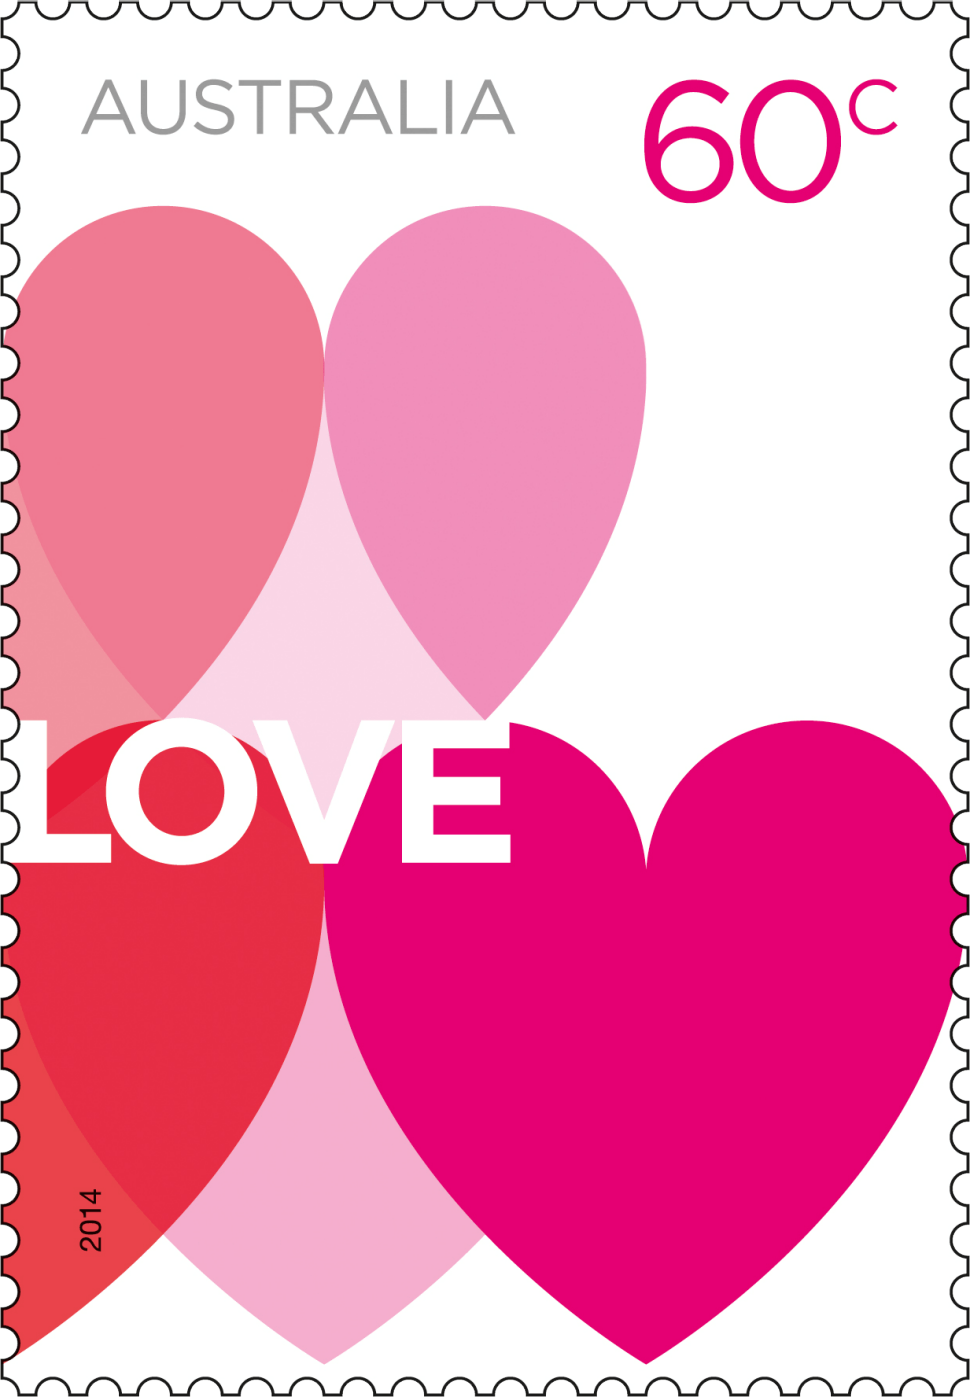 60 cent Hearts stamp